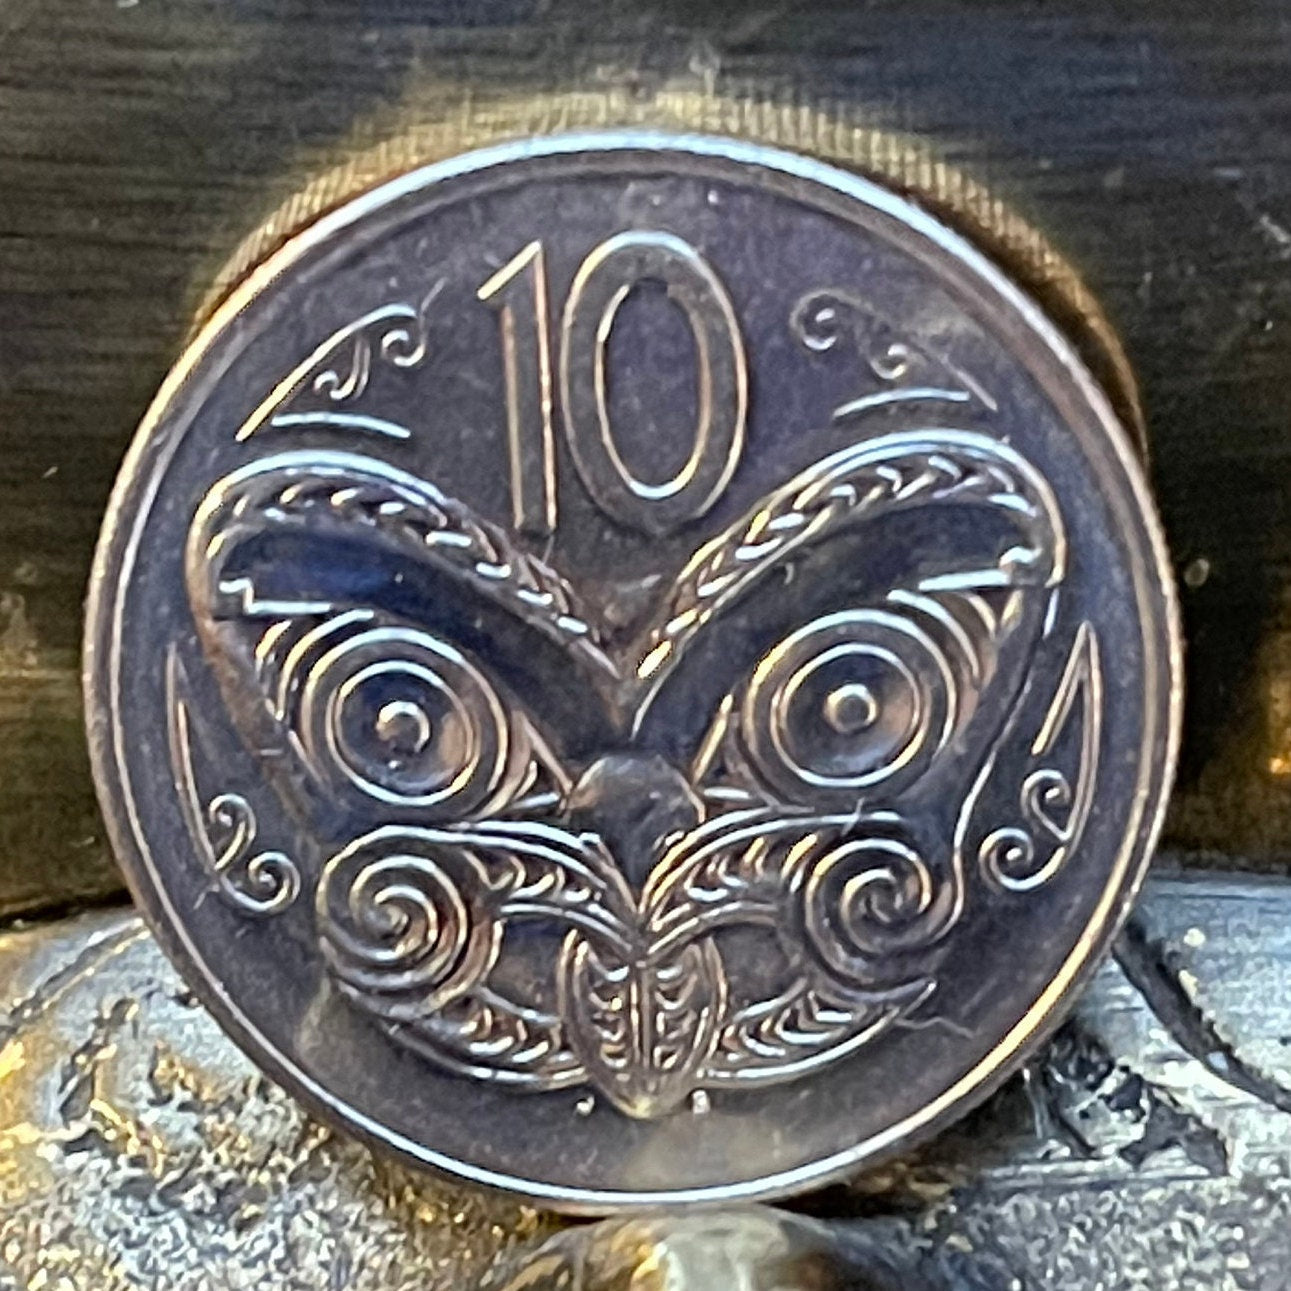 Maori Ancestor-Mask Koruru 10 Cents New Zealand Authentic Coin Money for Jewelry and Craft Making